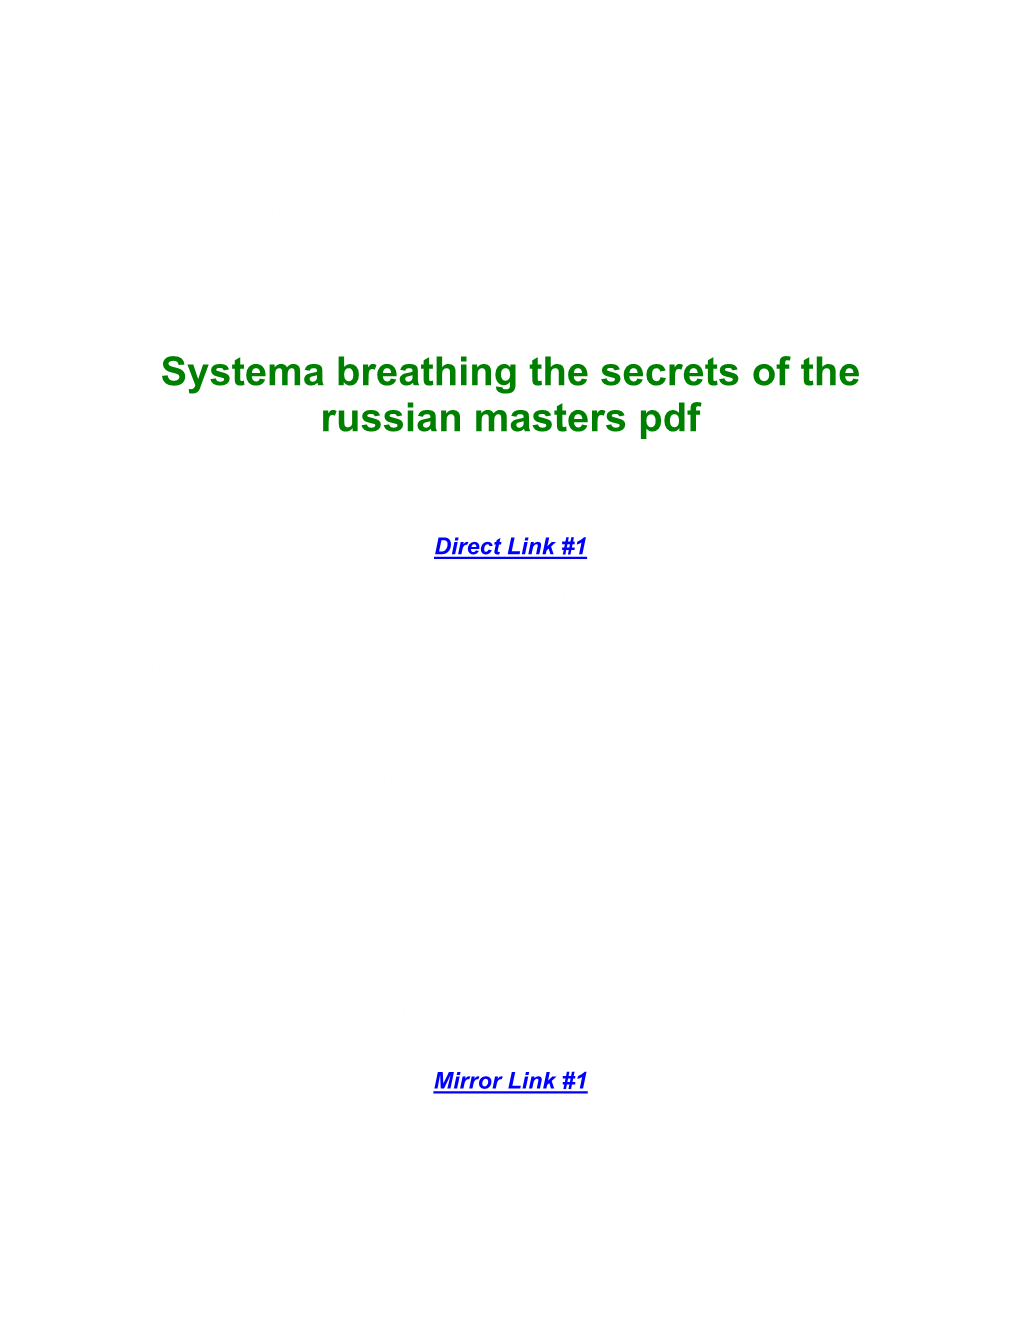 Systema Breathing the Secrets of the Russian Masters Pdf